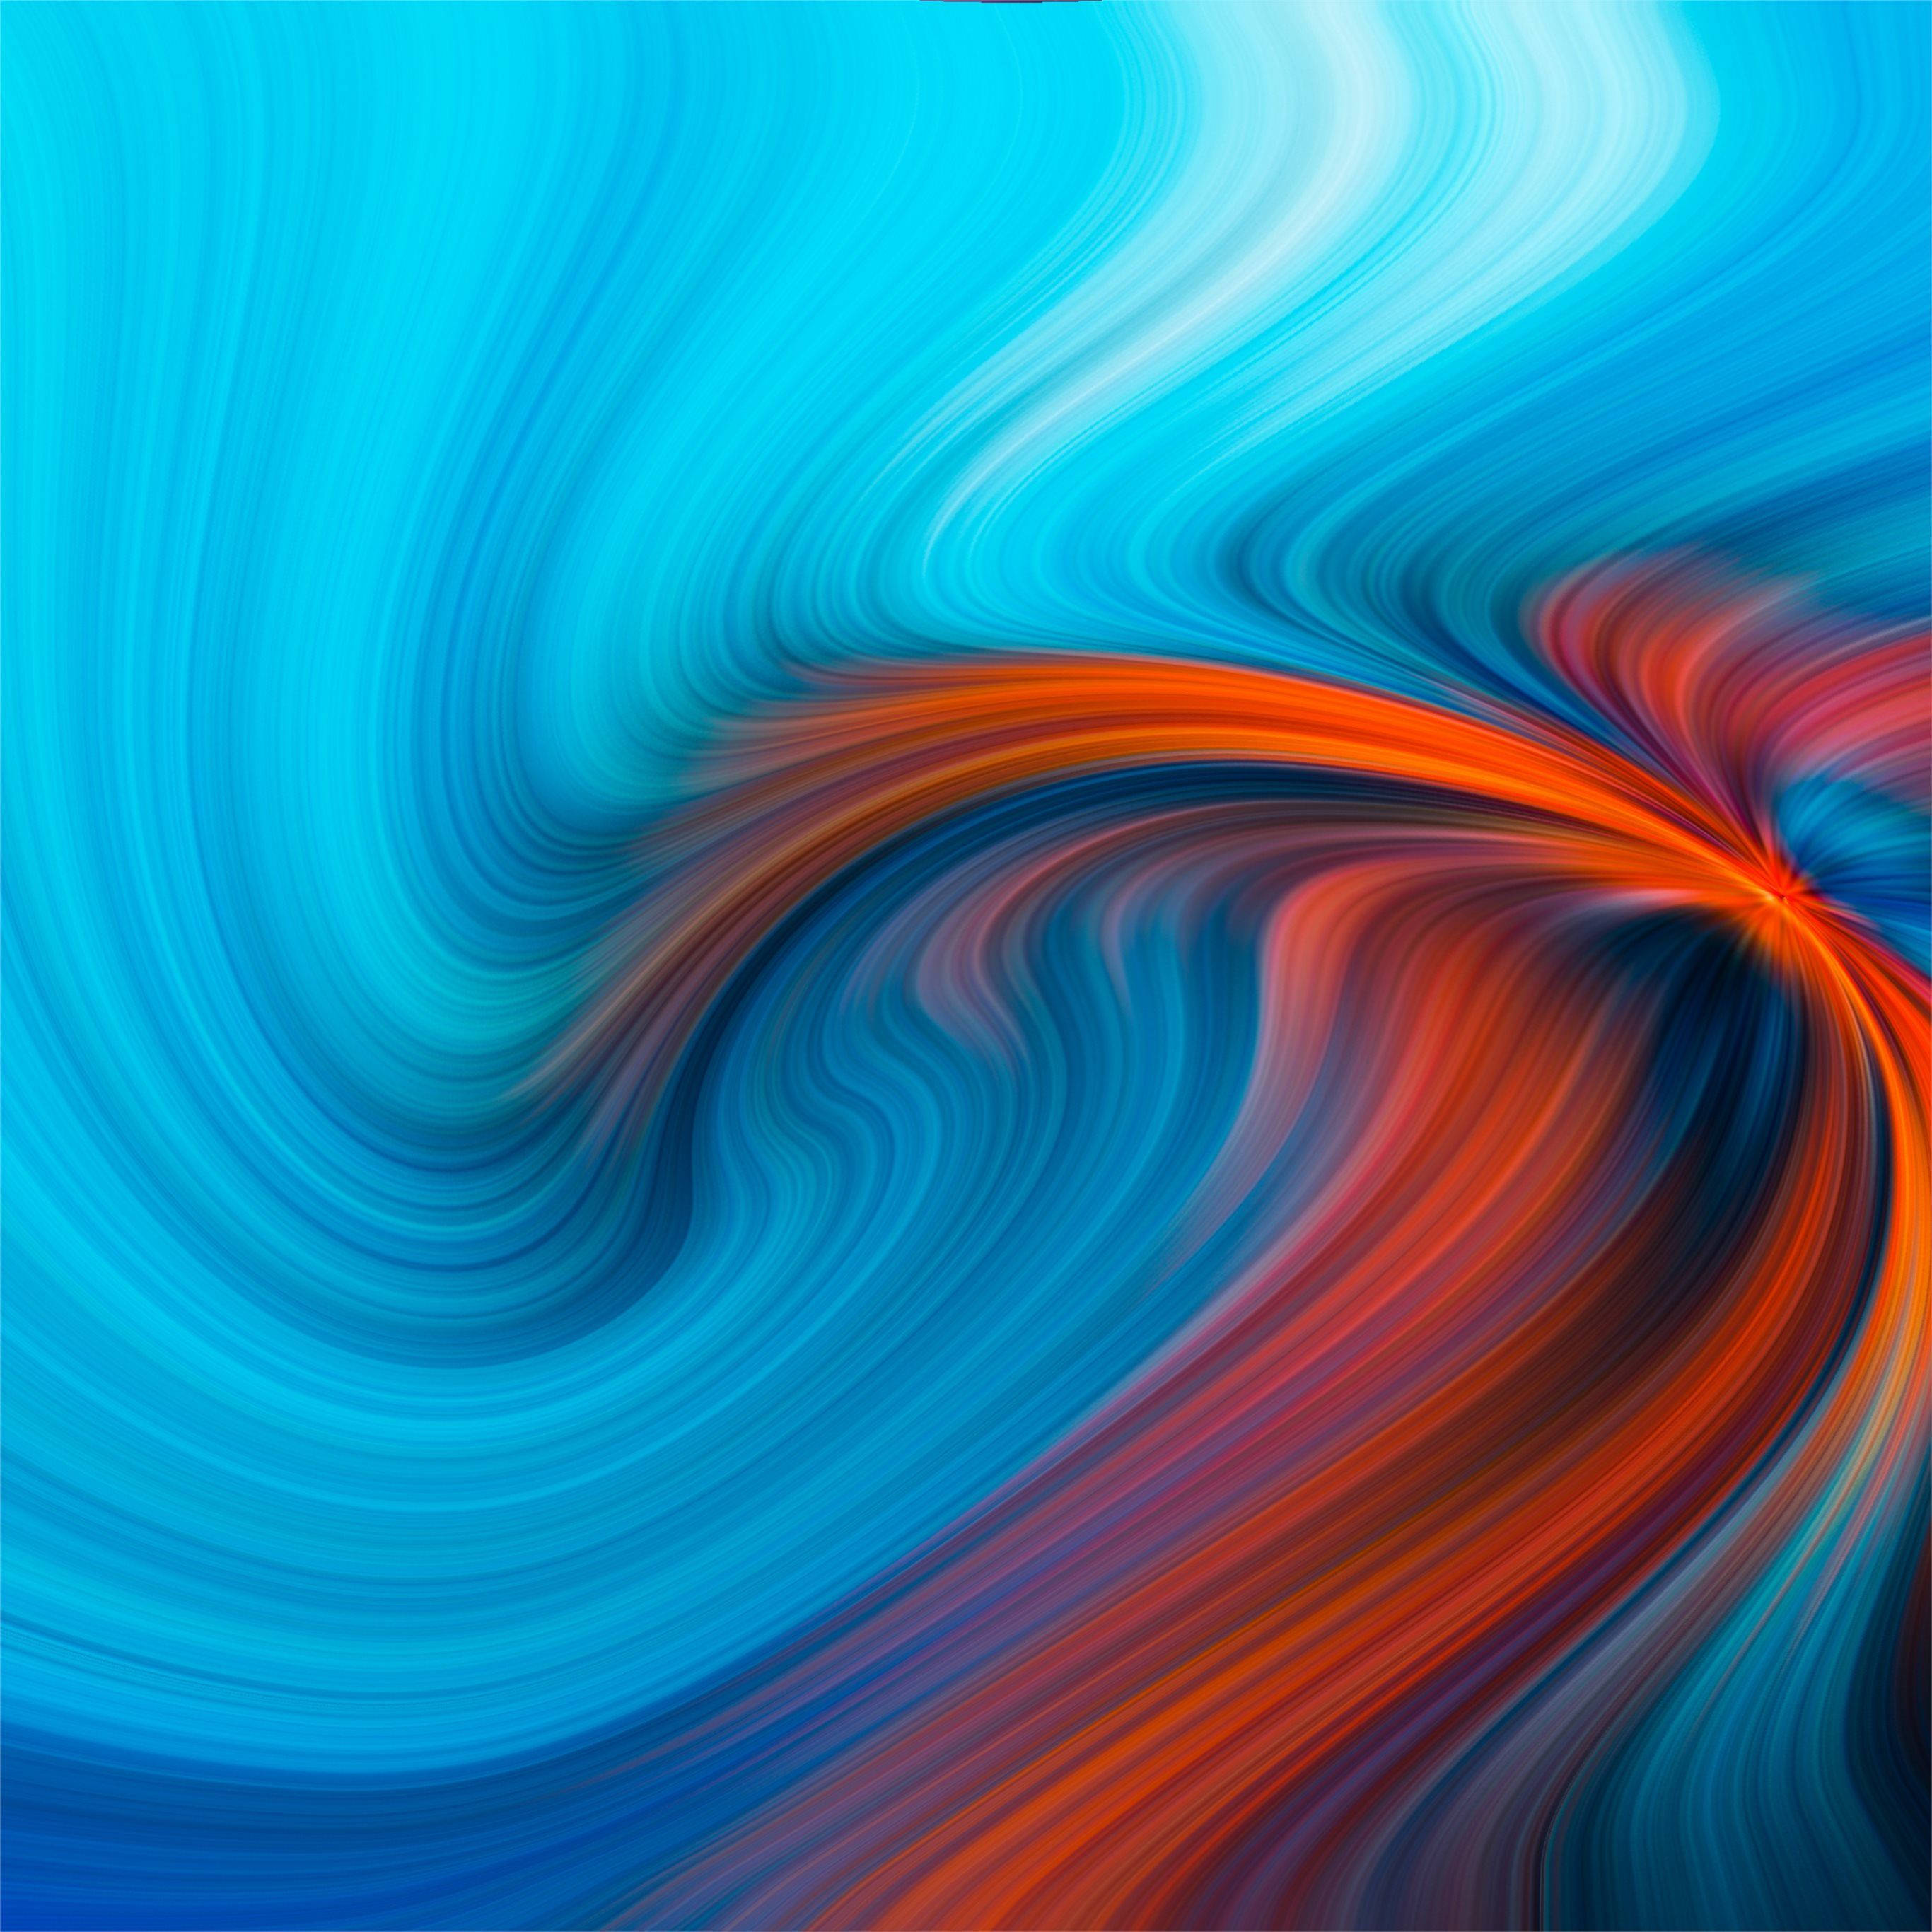 Abstract Illustration As Official Ipad Theme Wallpaper